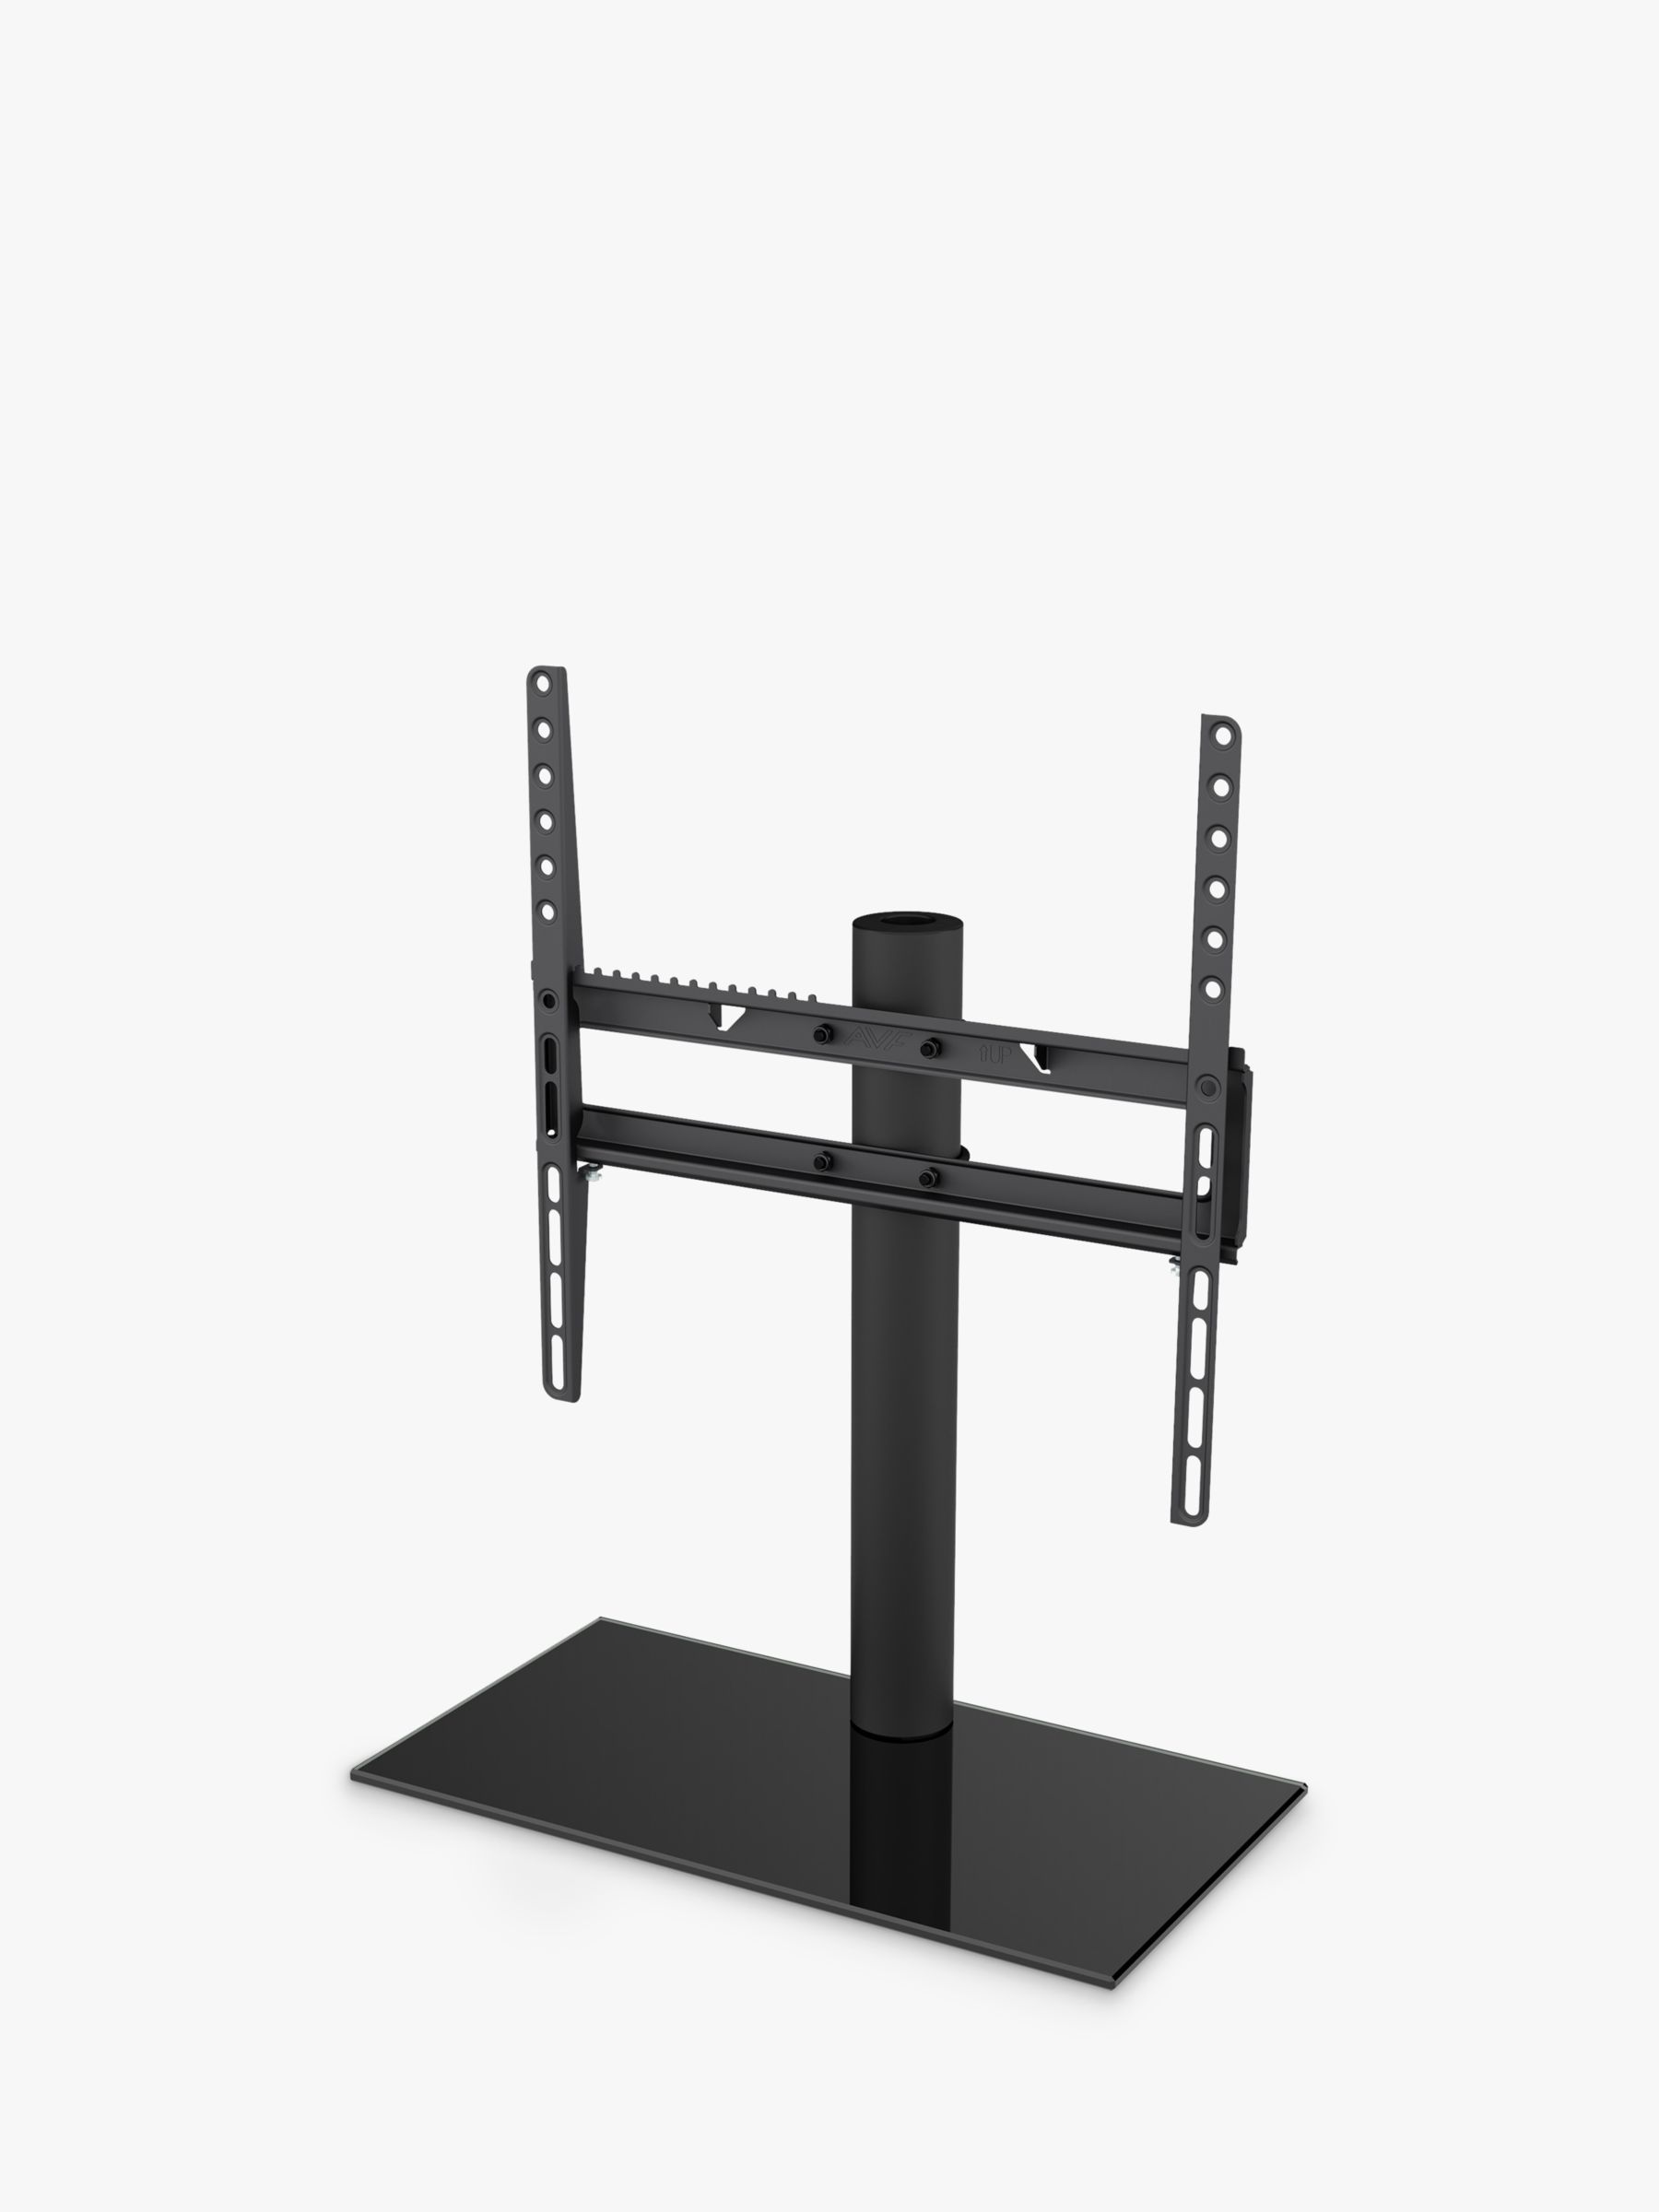 Photo of Avf b400bb table top stand for tvs up to 55